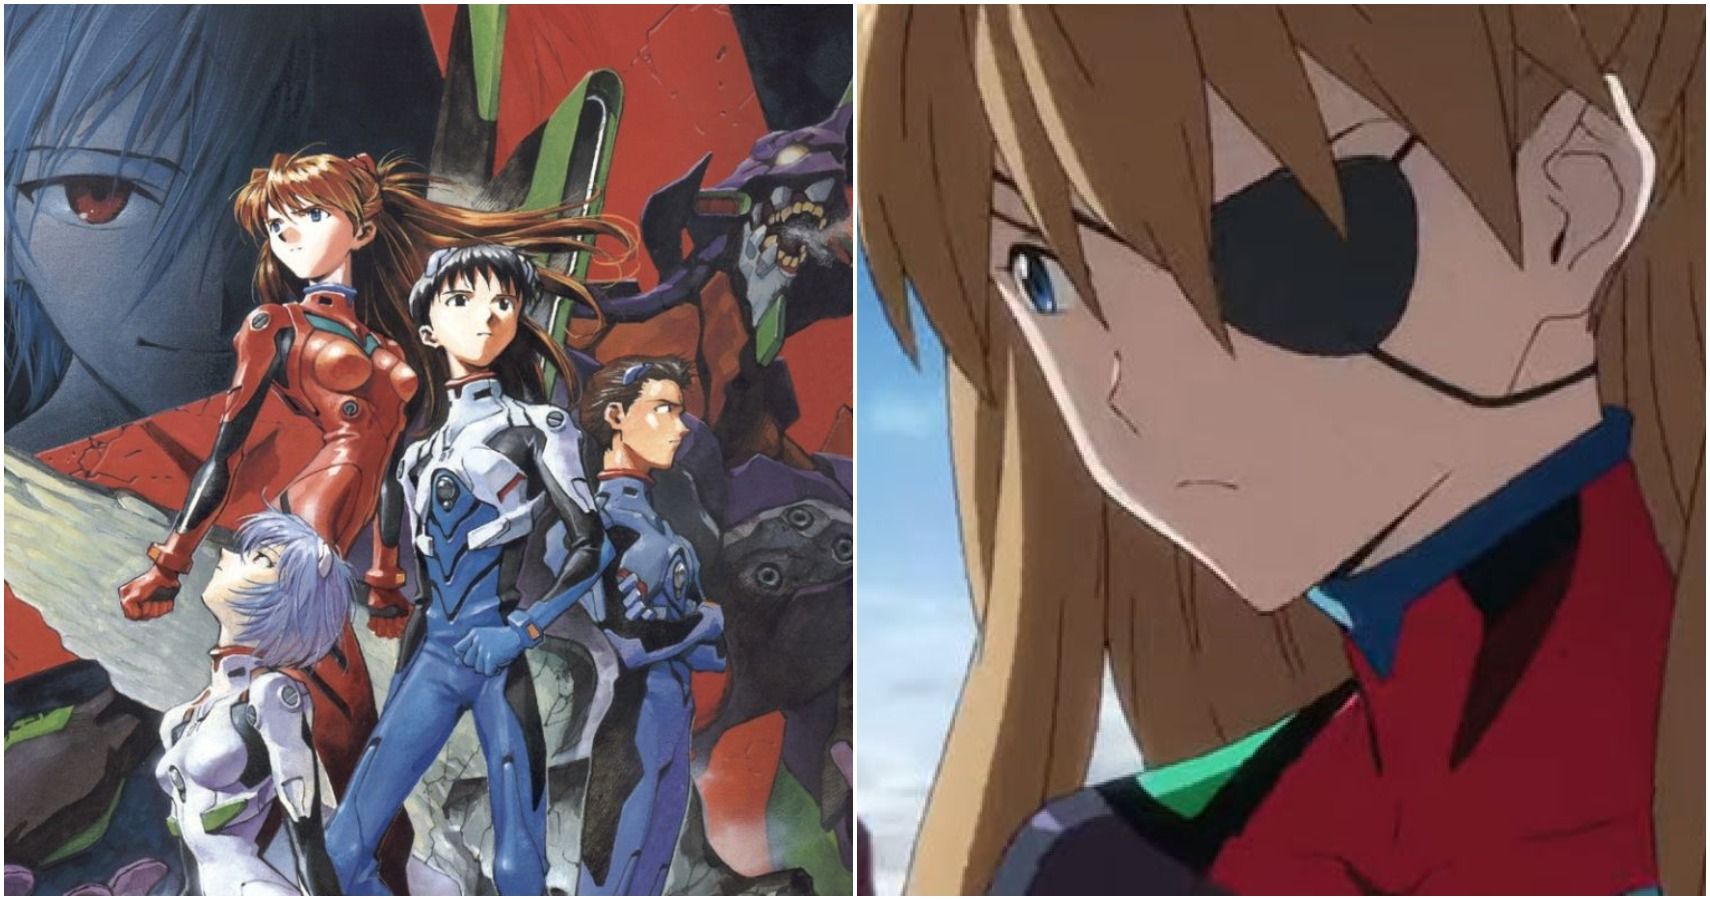 Why did the Rebuild of Evangelion Art style look so different? — Artistic  Evolution of Evangelion, by Lux Mallen